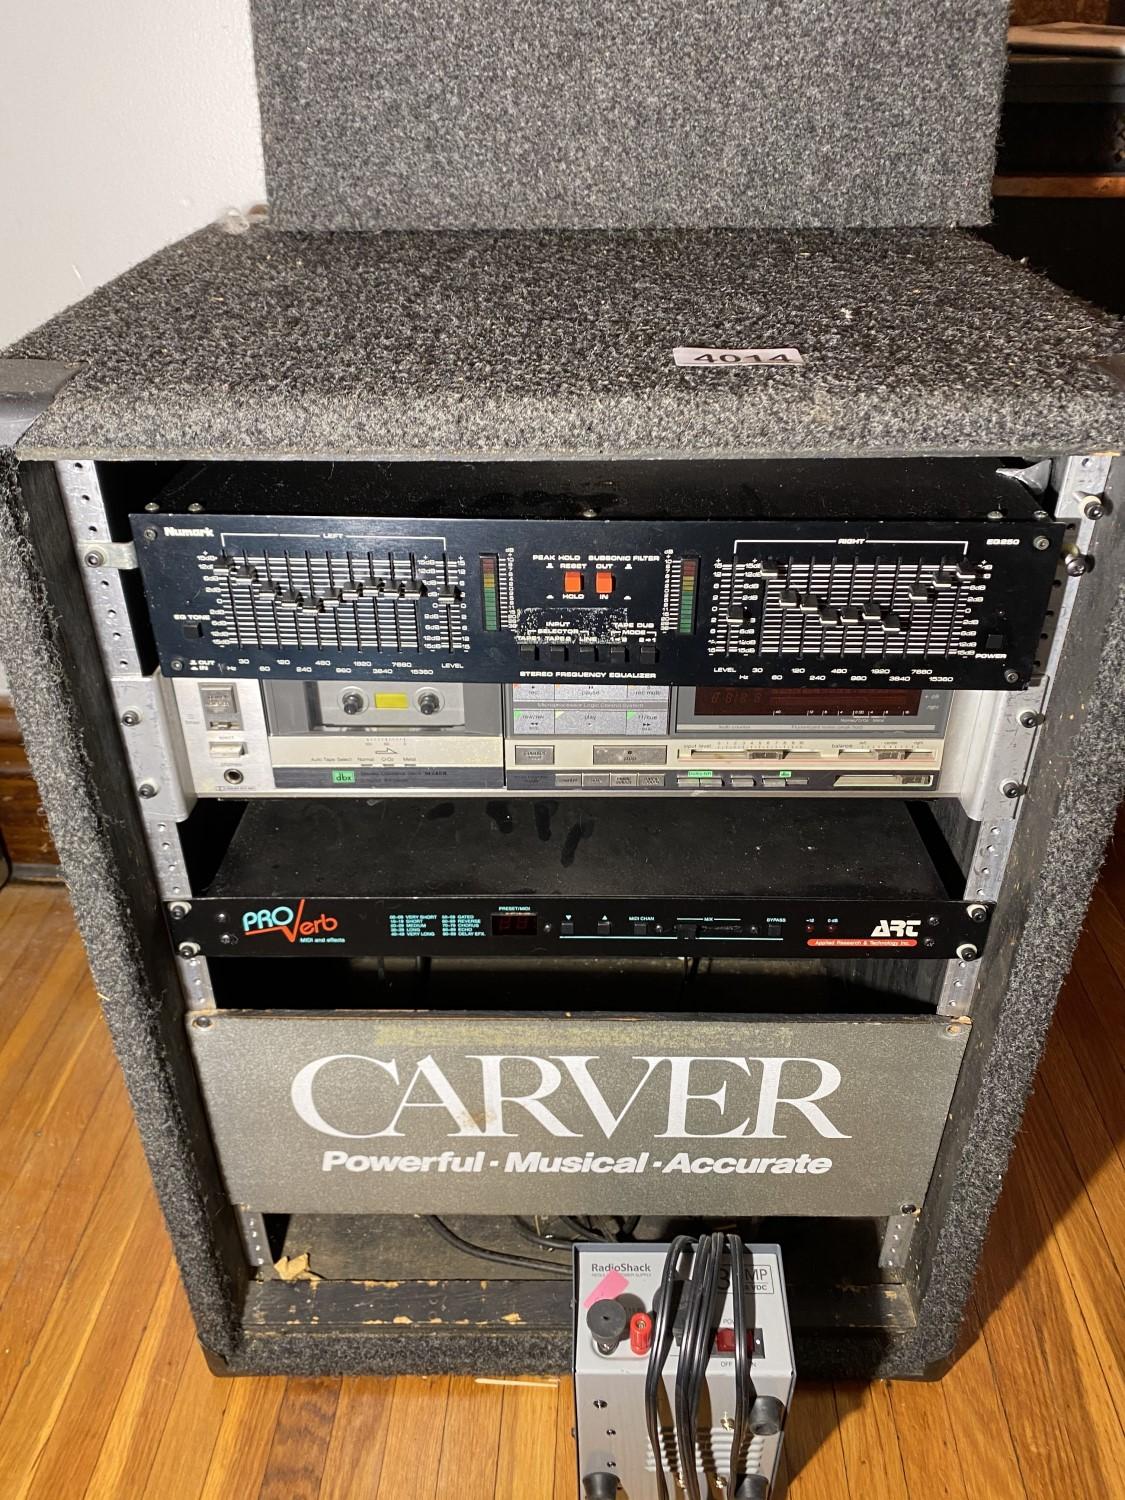 Vintage rack case with Music Components